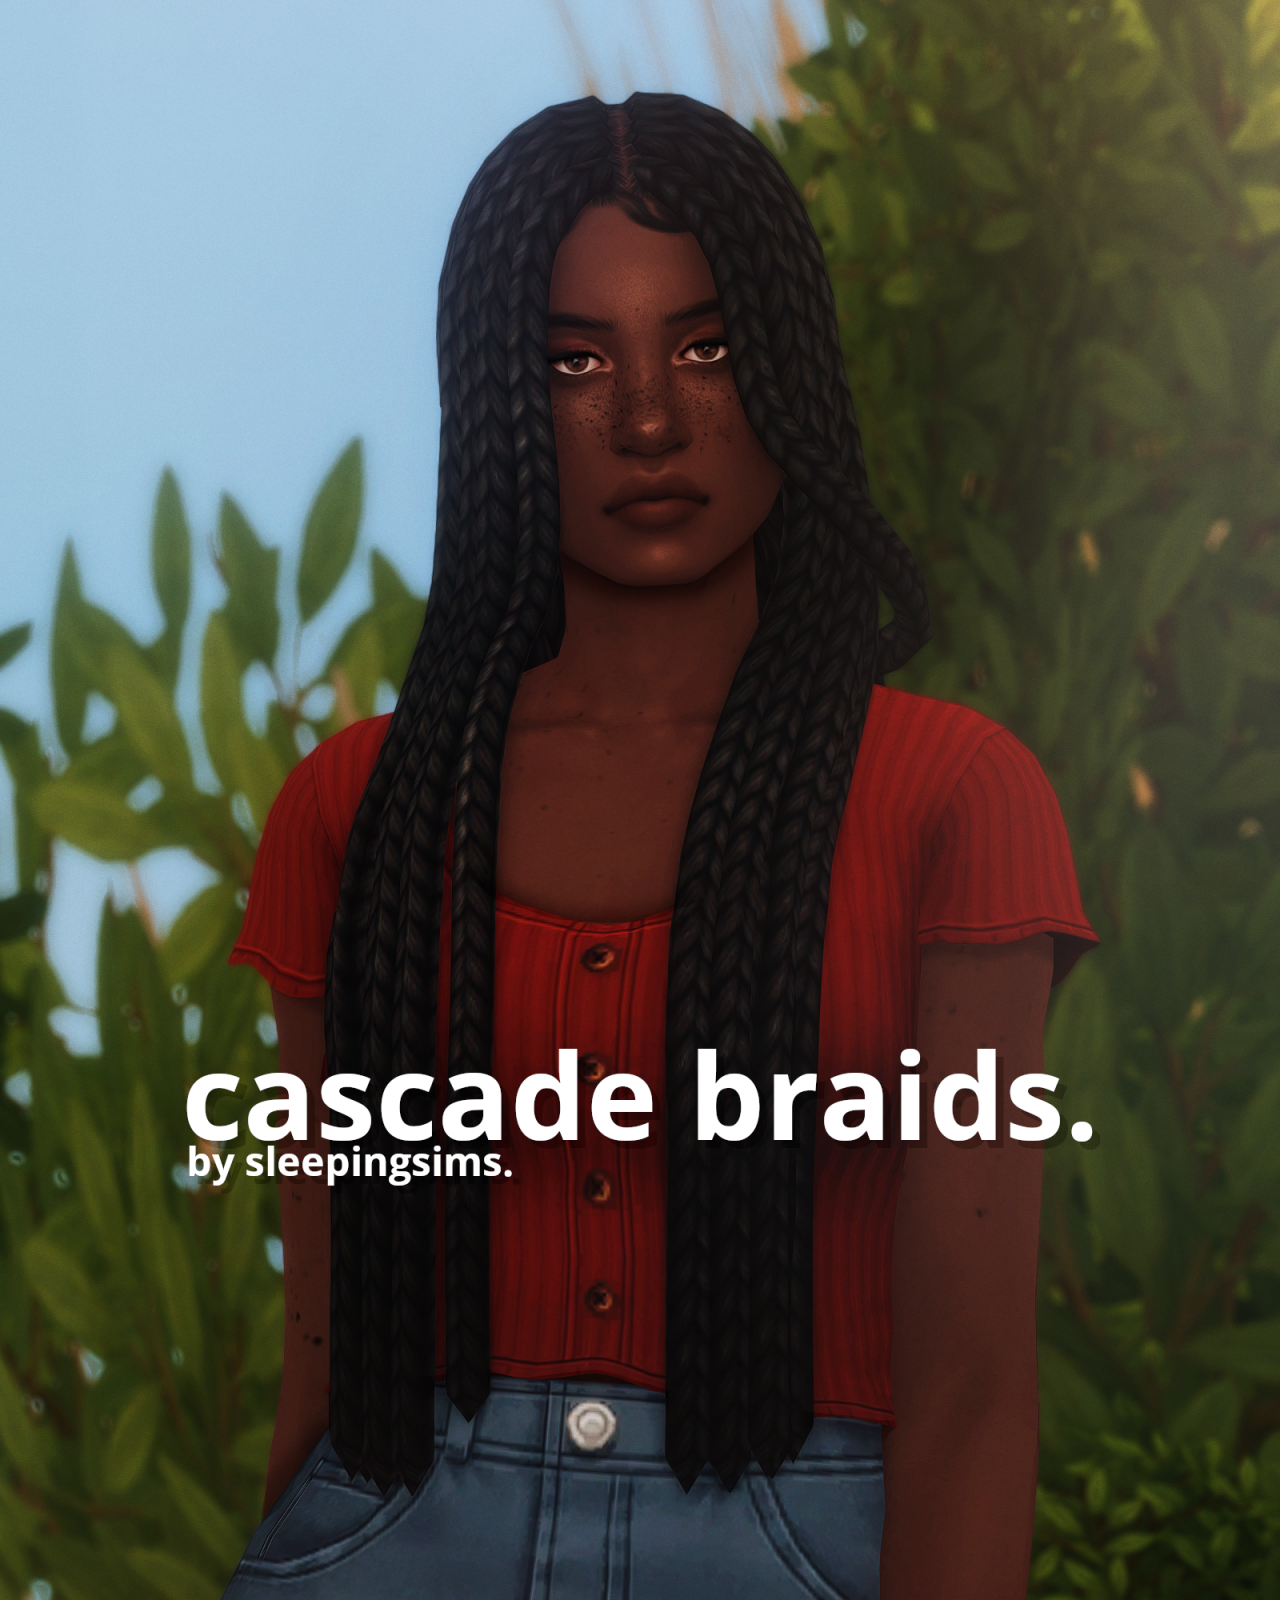 cascade braids.some longer braids from scratch idk “24 ea swatches + 7 mod max add-ons BGC, hat chops, shadow map, LODs, etc. some clipping with extreme morphs and bulky clothing ” download / alt [[MORE]]“polycount: 10.0k / 5.8k / 3.4k /...